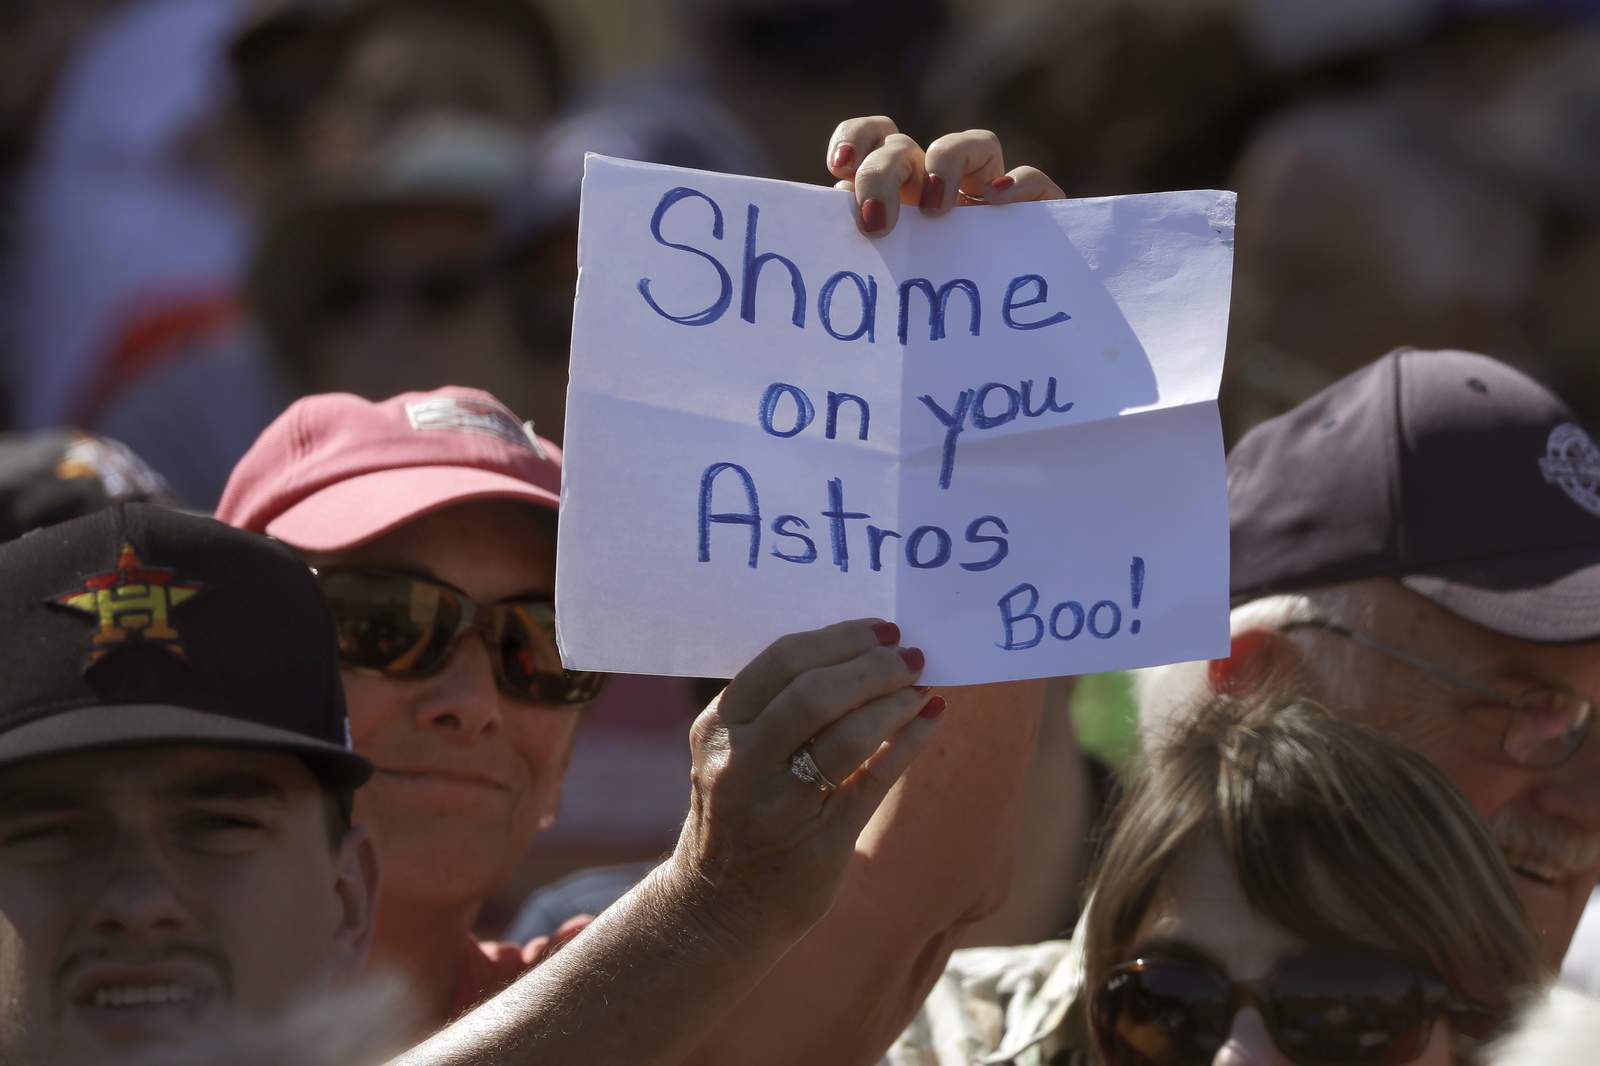 Astros hope to move on from cheating scandal as MLB restarts